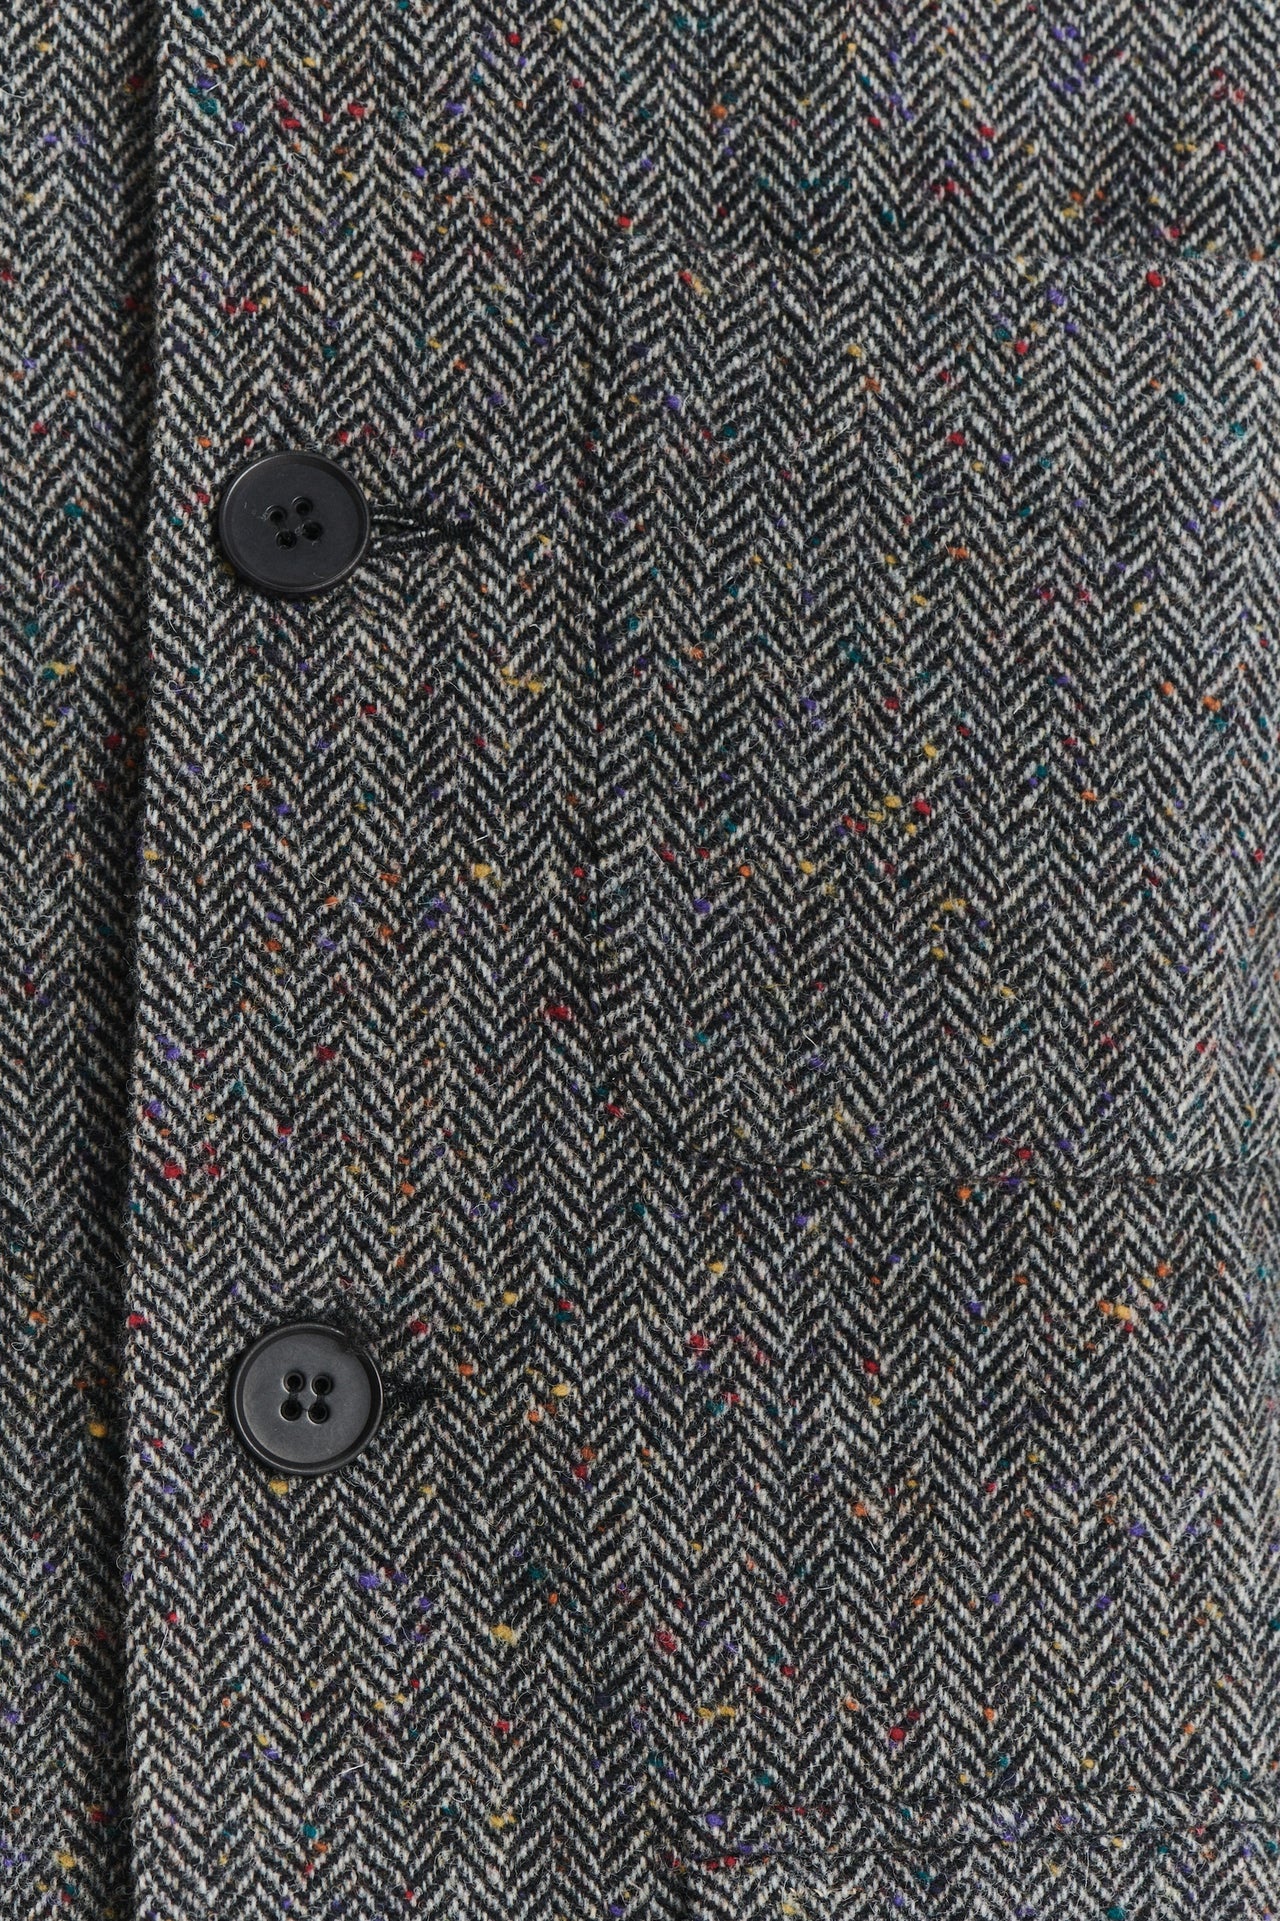 Relaxed Forest Jacket in a Grey and Black Italian Virgin Wool Herringbone Tweed with MEIDA Thermo Insulation